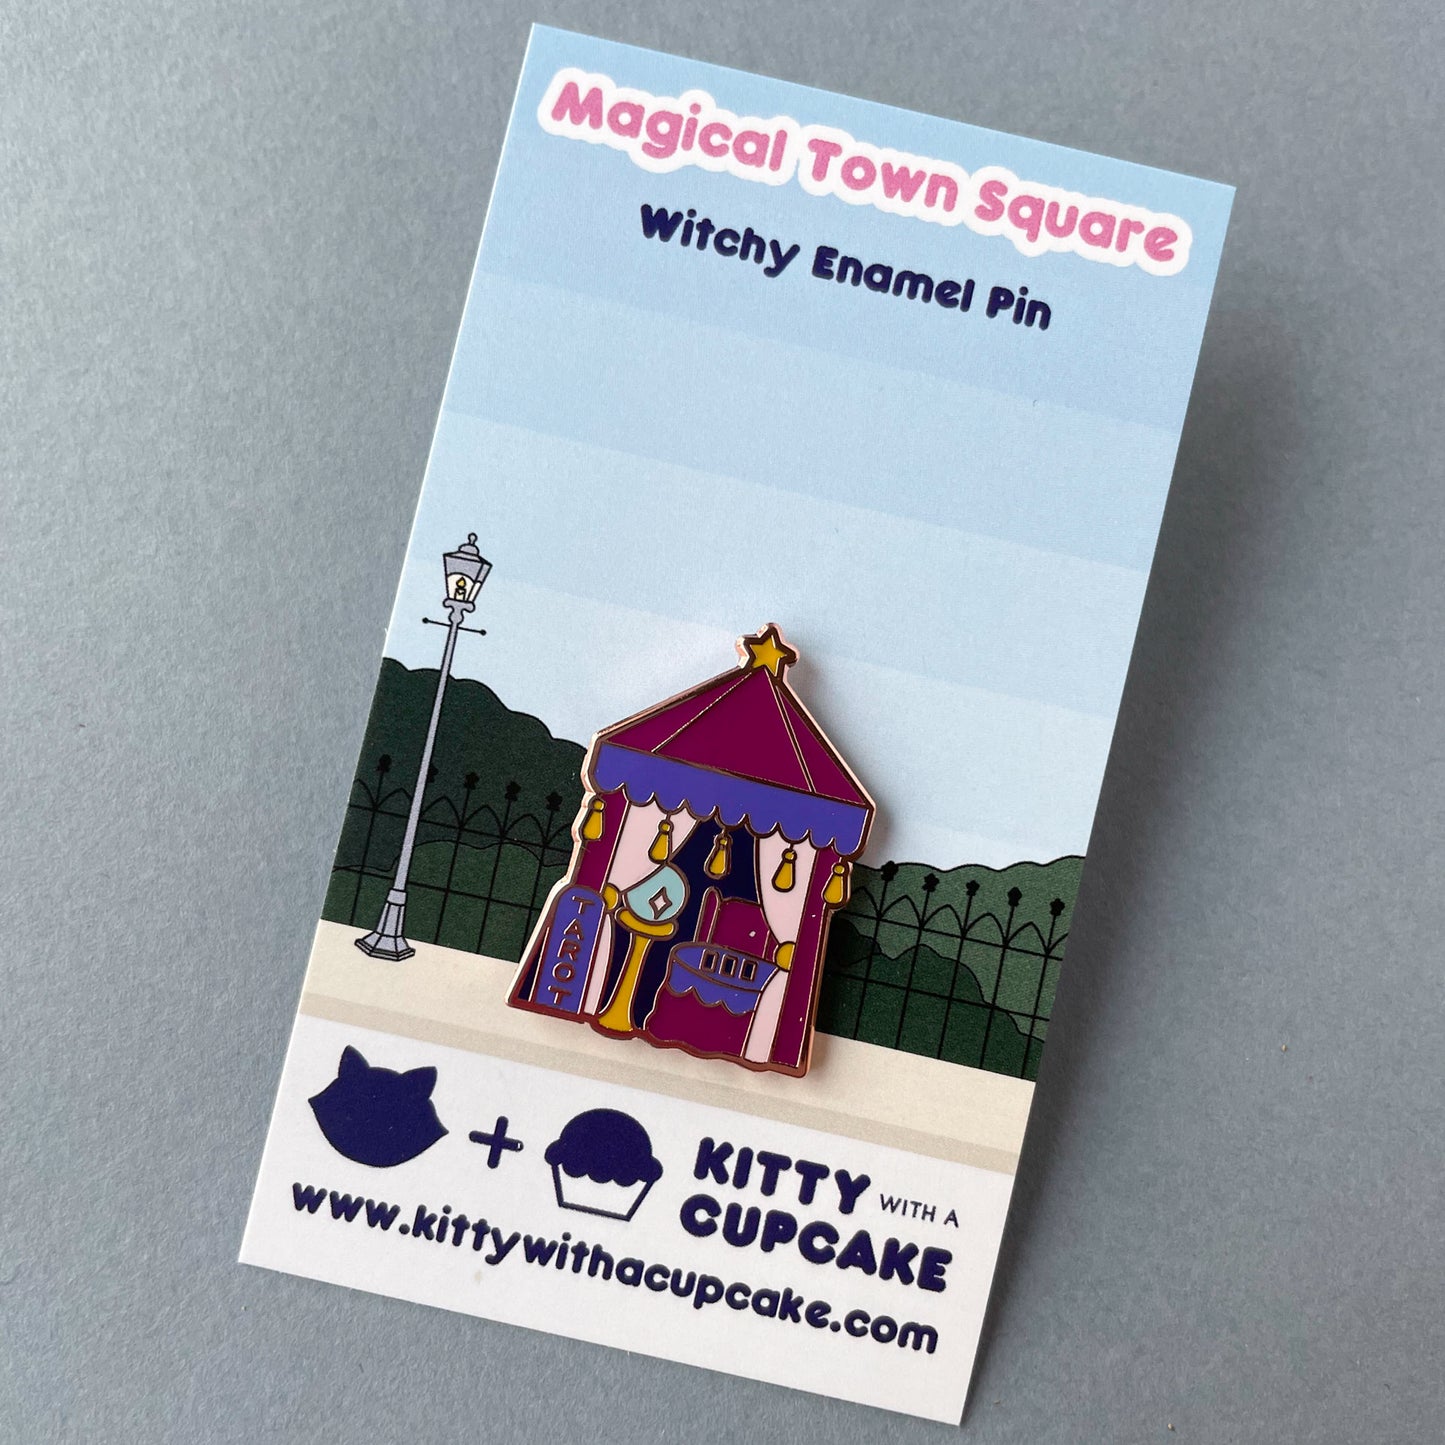 A tarot tent pin on its card packaging. The card reads "Magical Town Square Witchy Enamel Pin" and has a street with a fence and a light post printed on it.